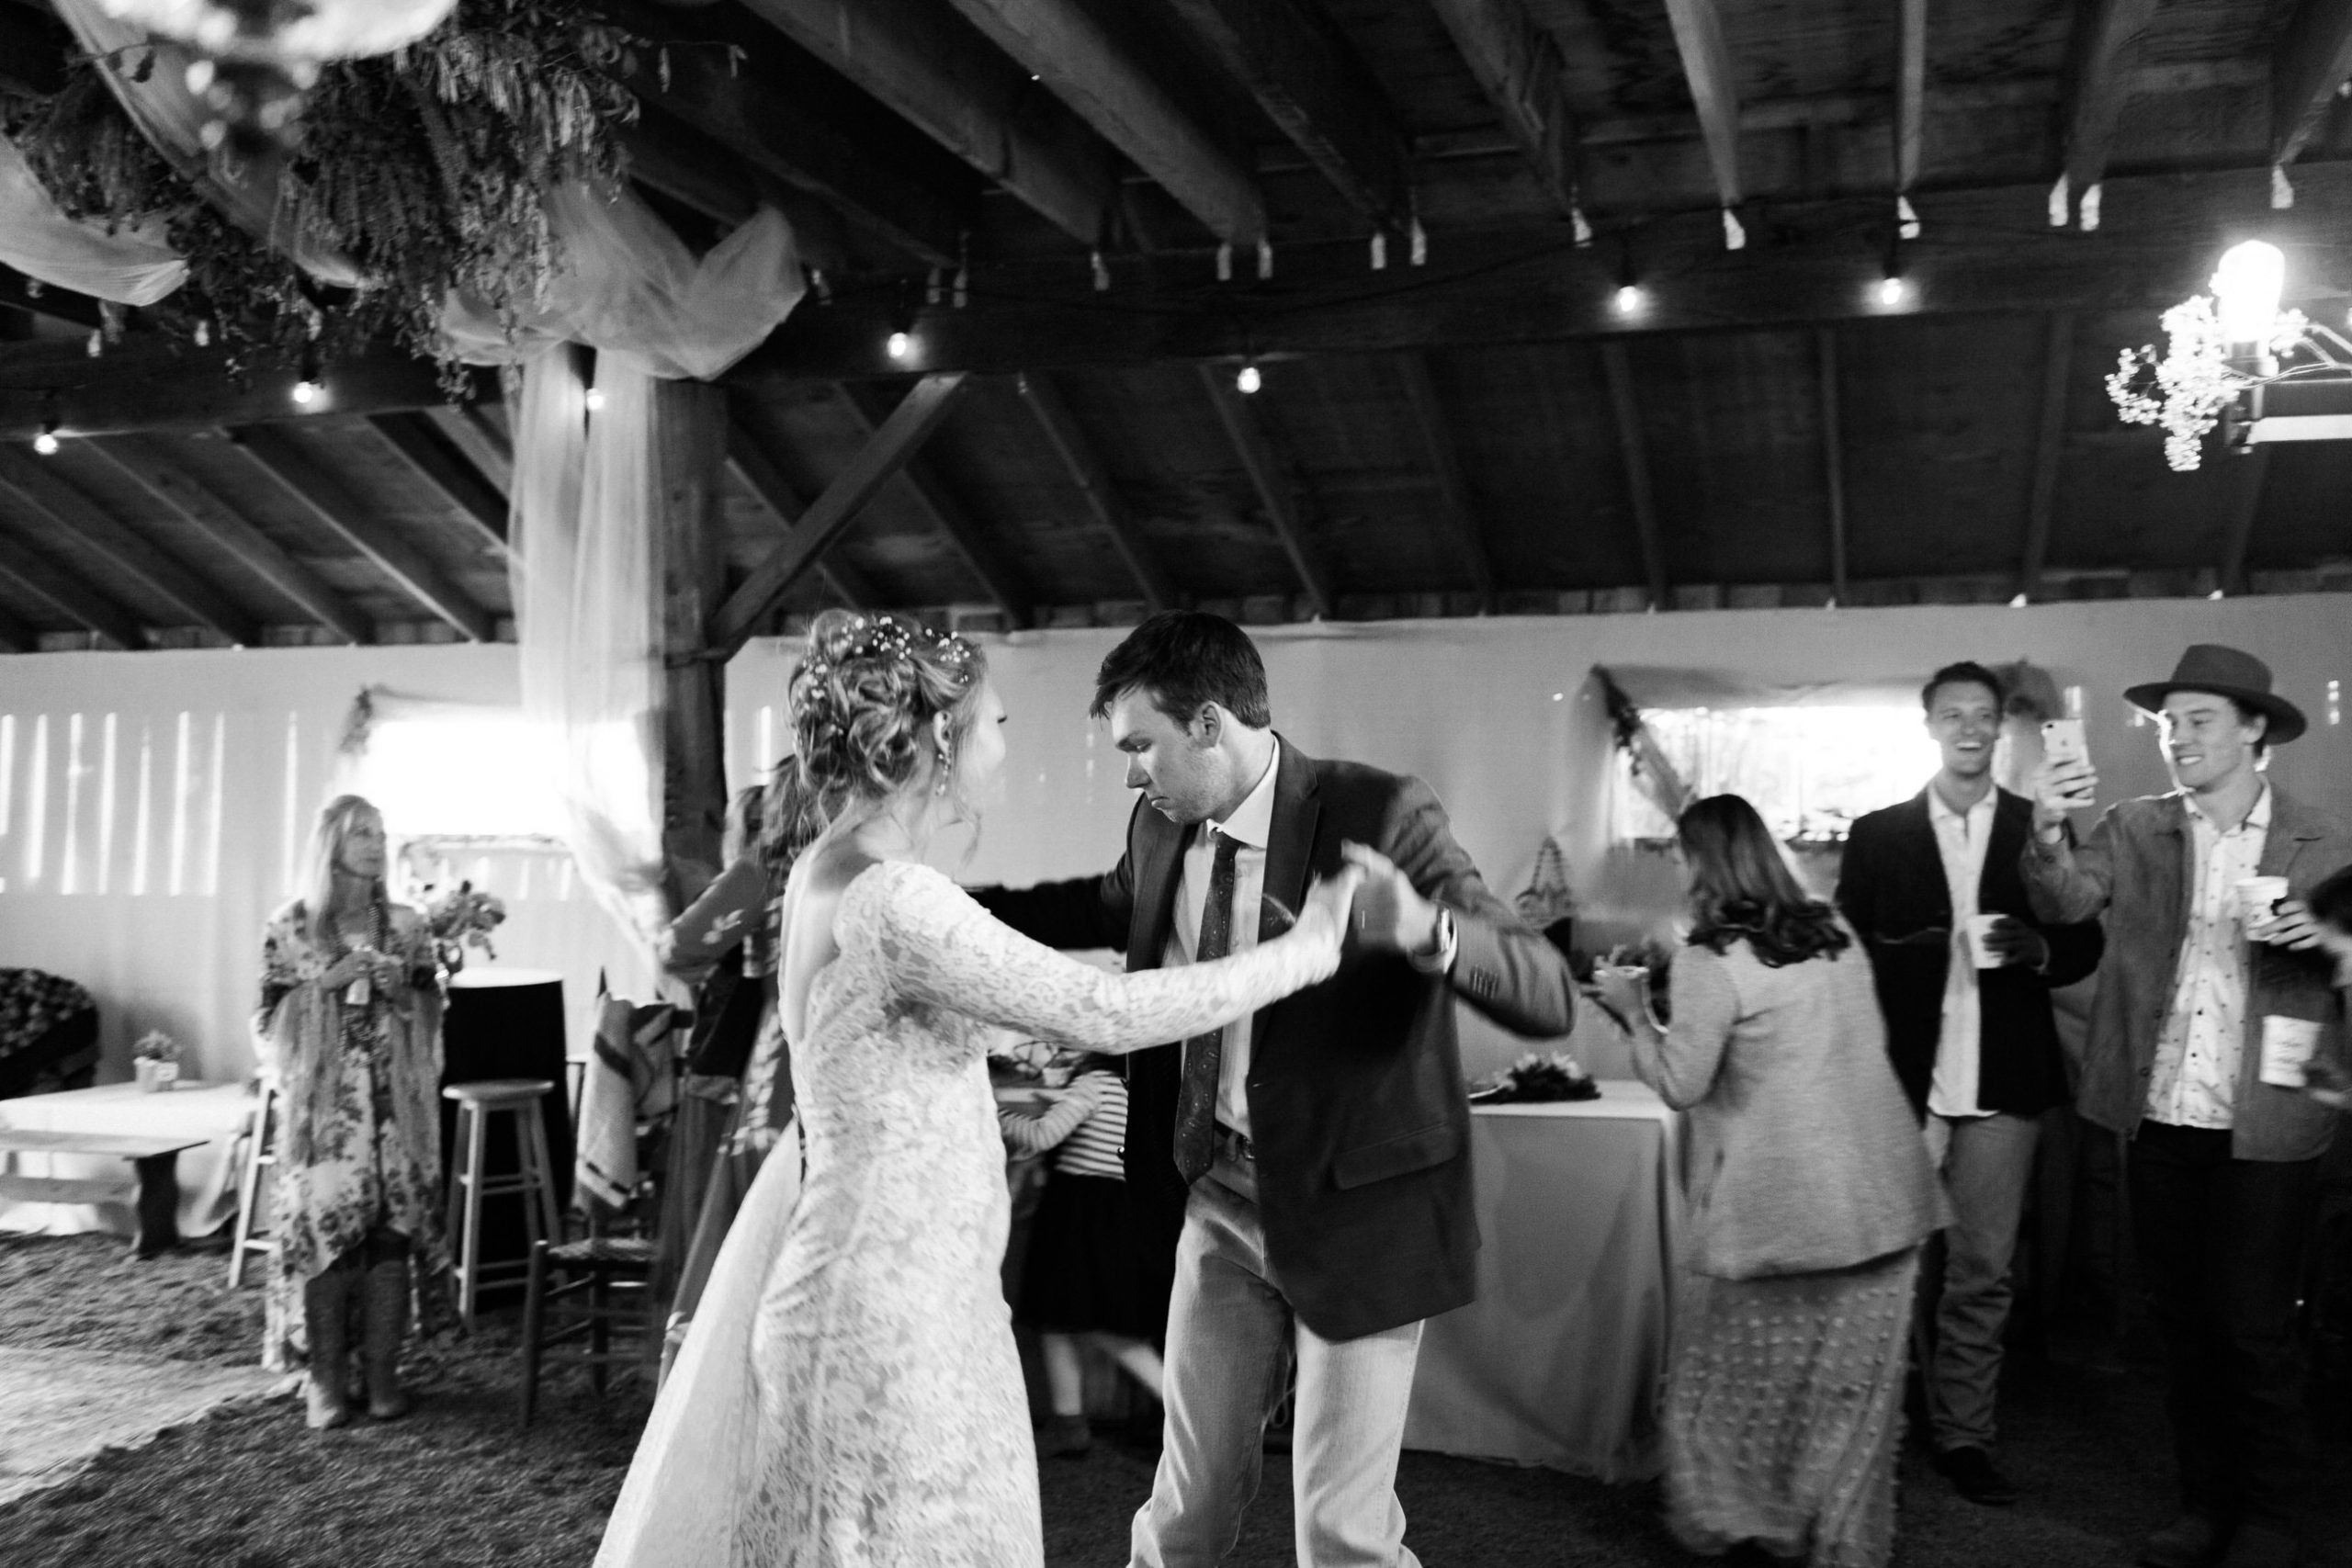 bride and groom first dance at wedding reception